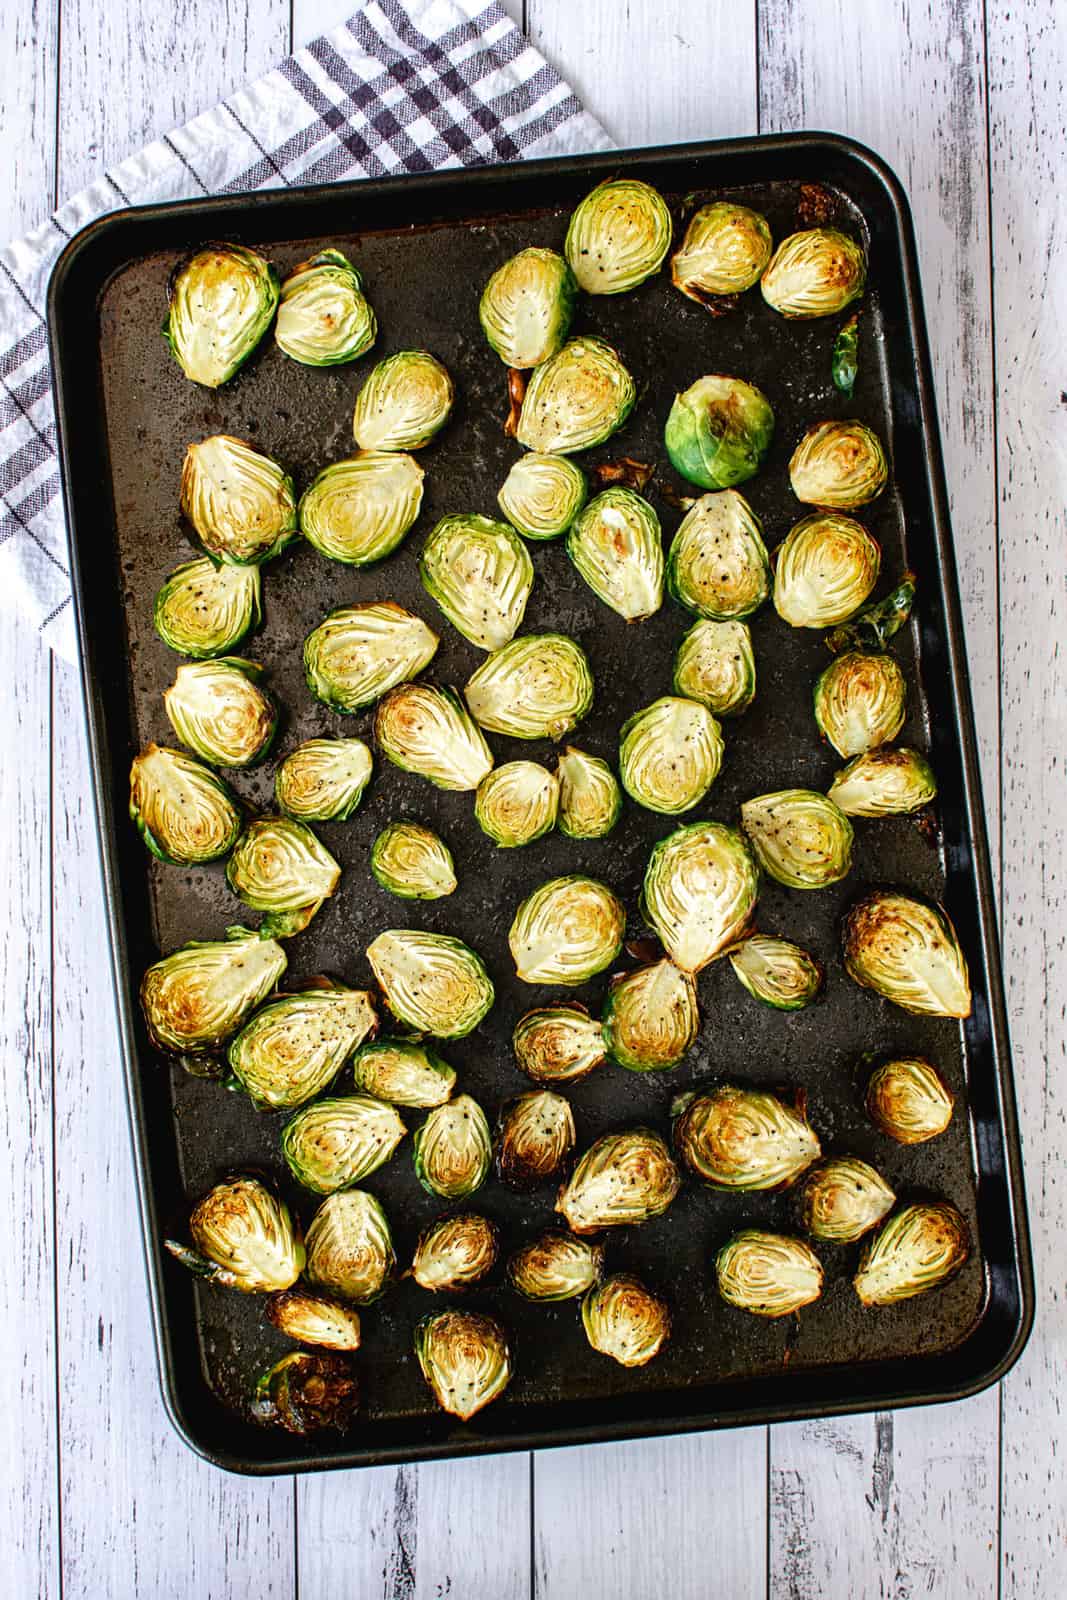 pan of roasted brussels sprouts